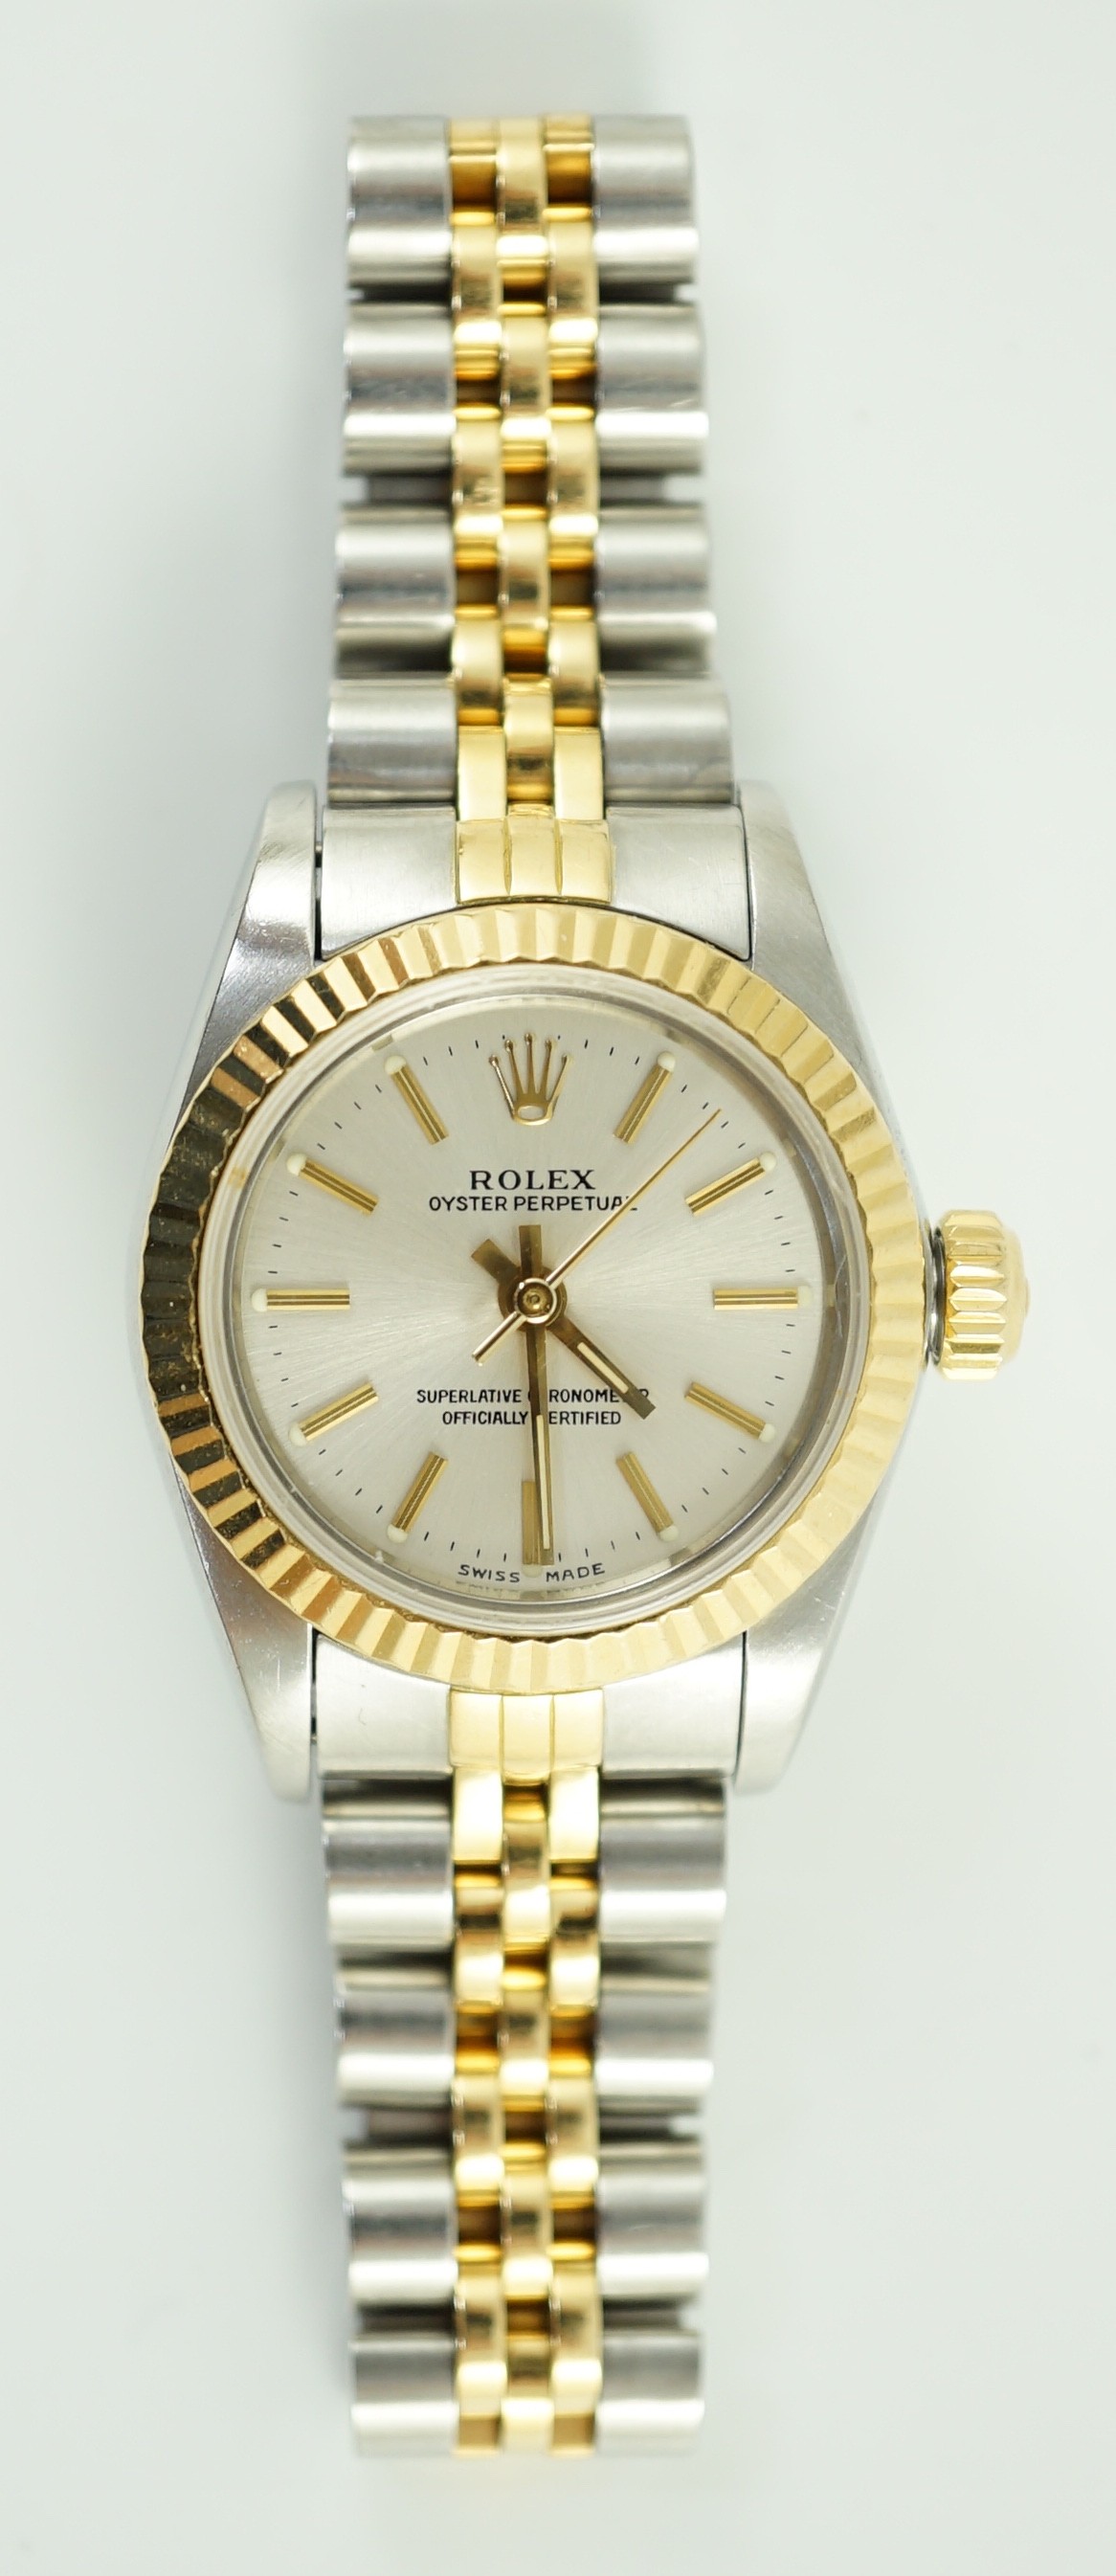 A lady's early 1990's steel and gold Rolex Oyster Perpetual wrist watch, on a steel and gold Rolex bracelet